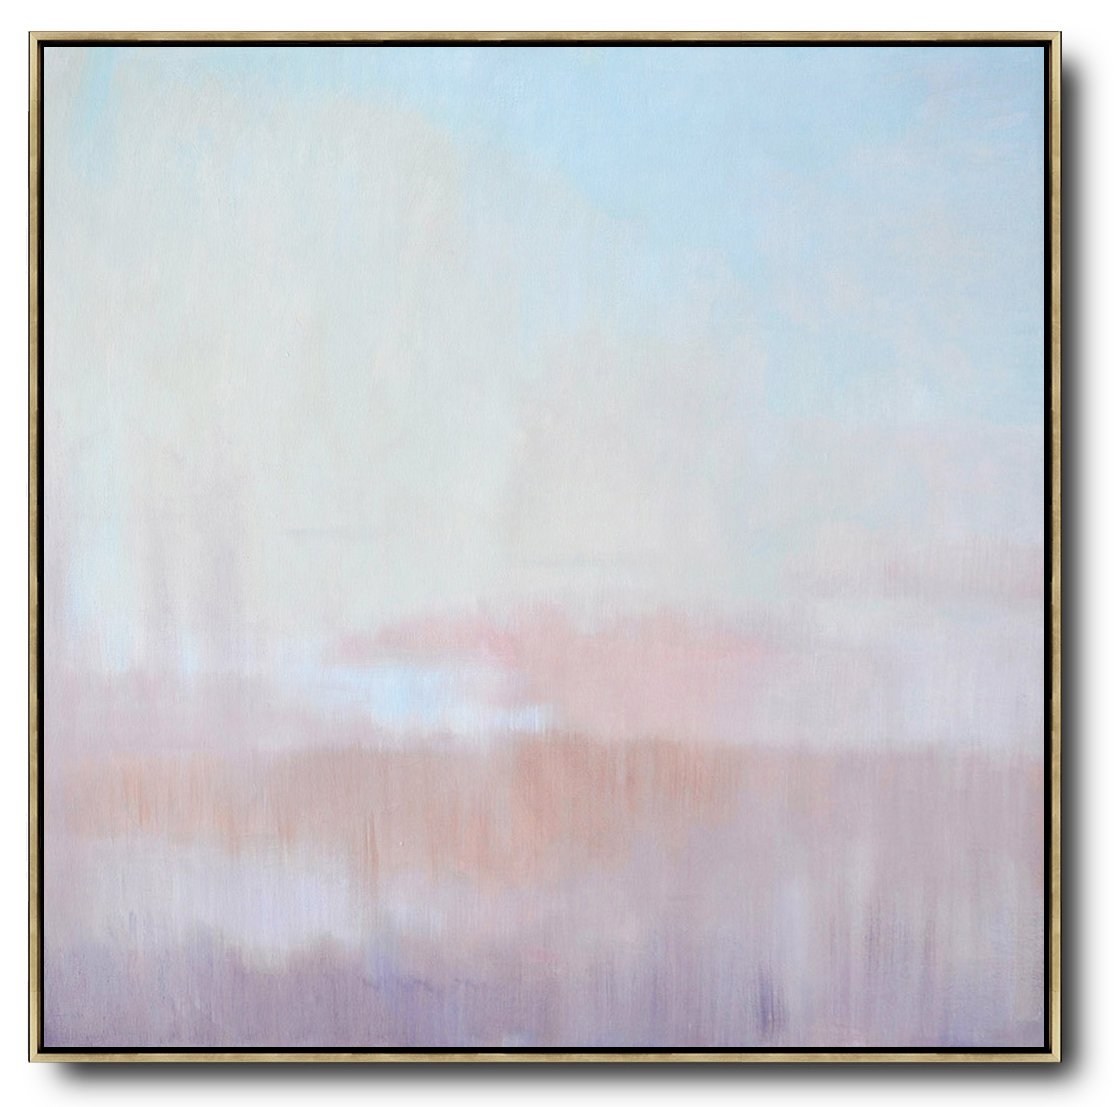 Extra Large Painting,Oversized Abstract Landscape Oil Painting,Unique Canvas Art,Blue,Pink,Purple.etc